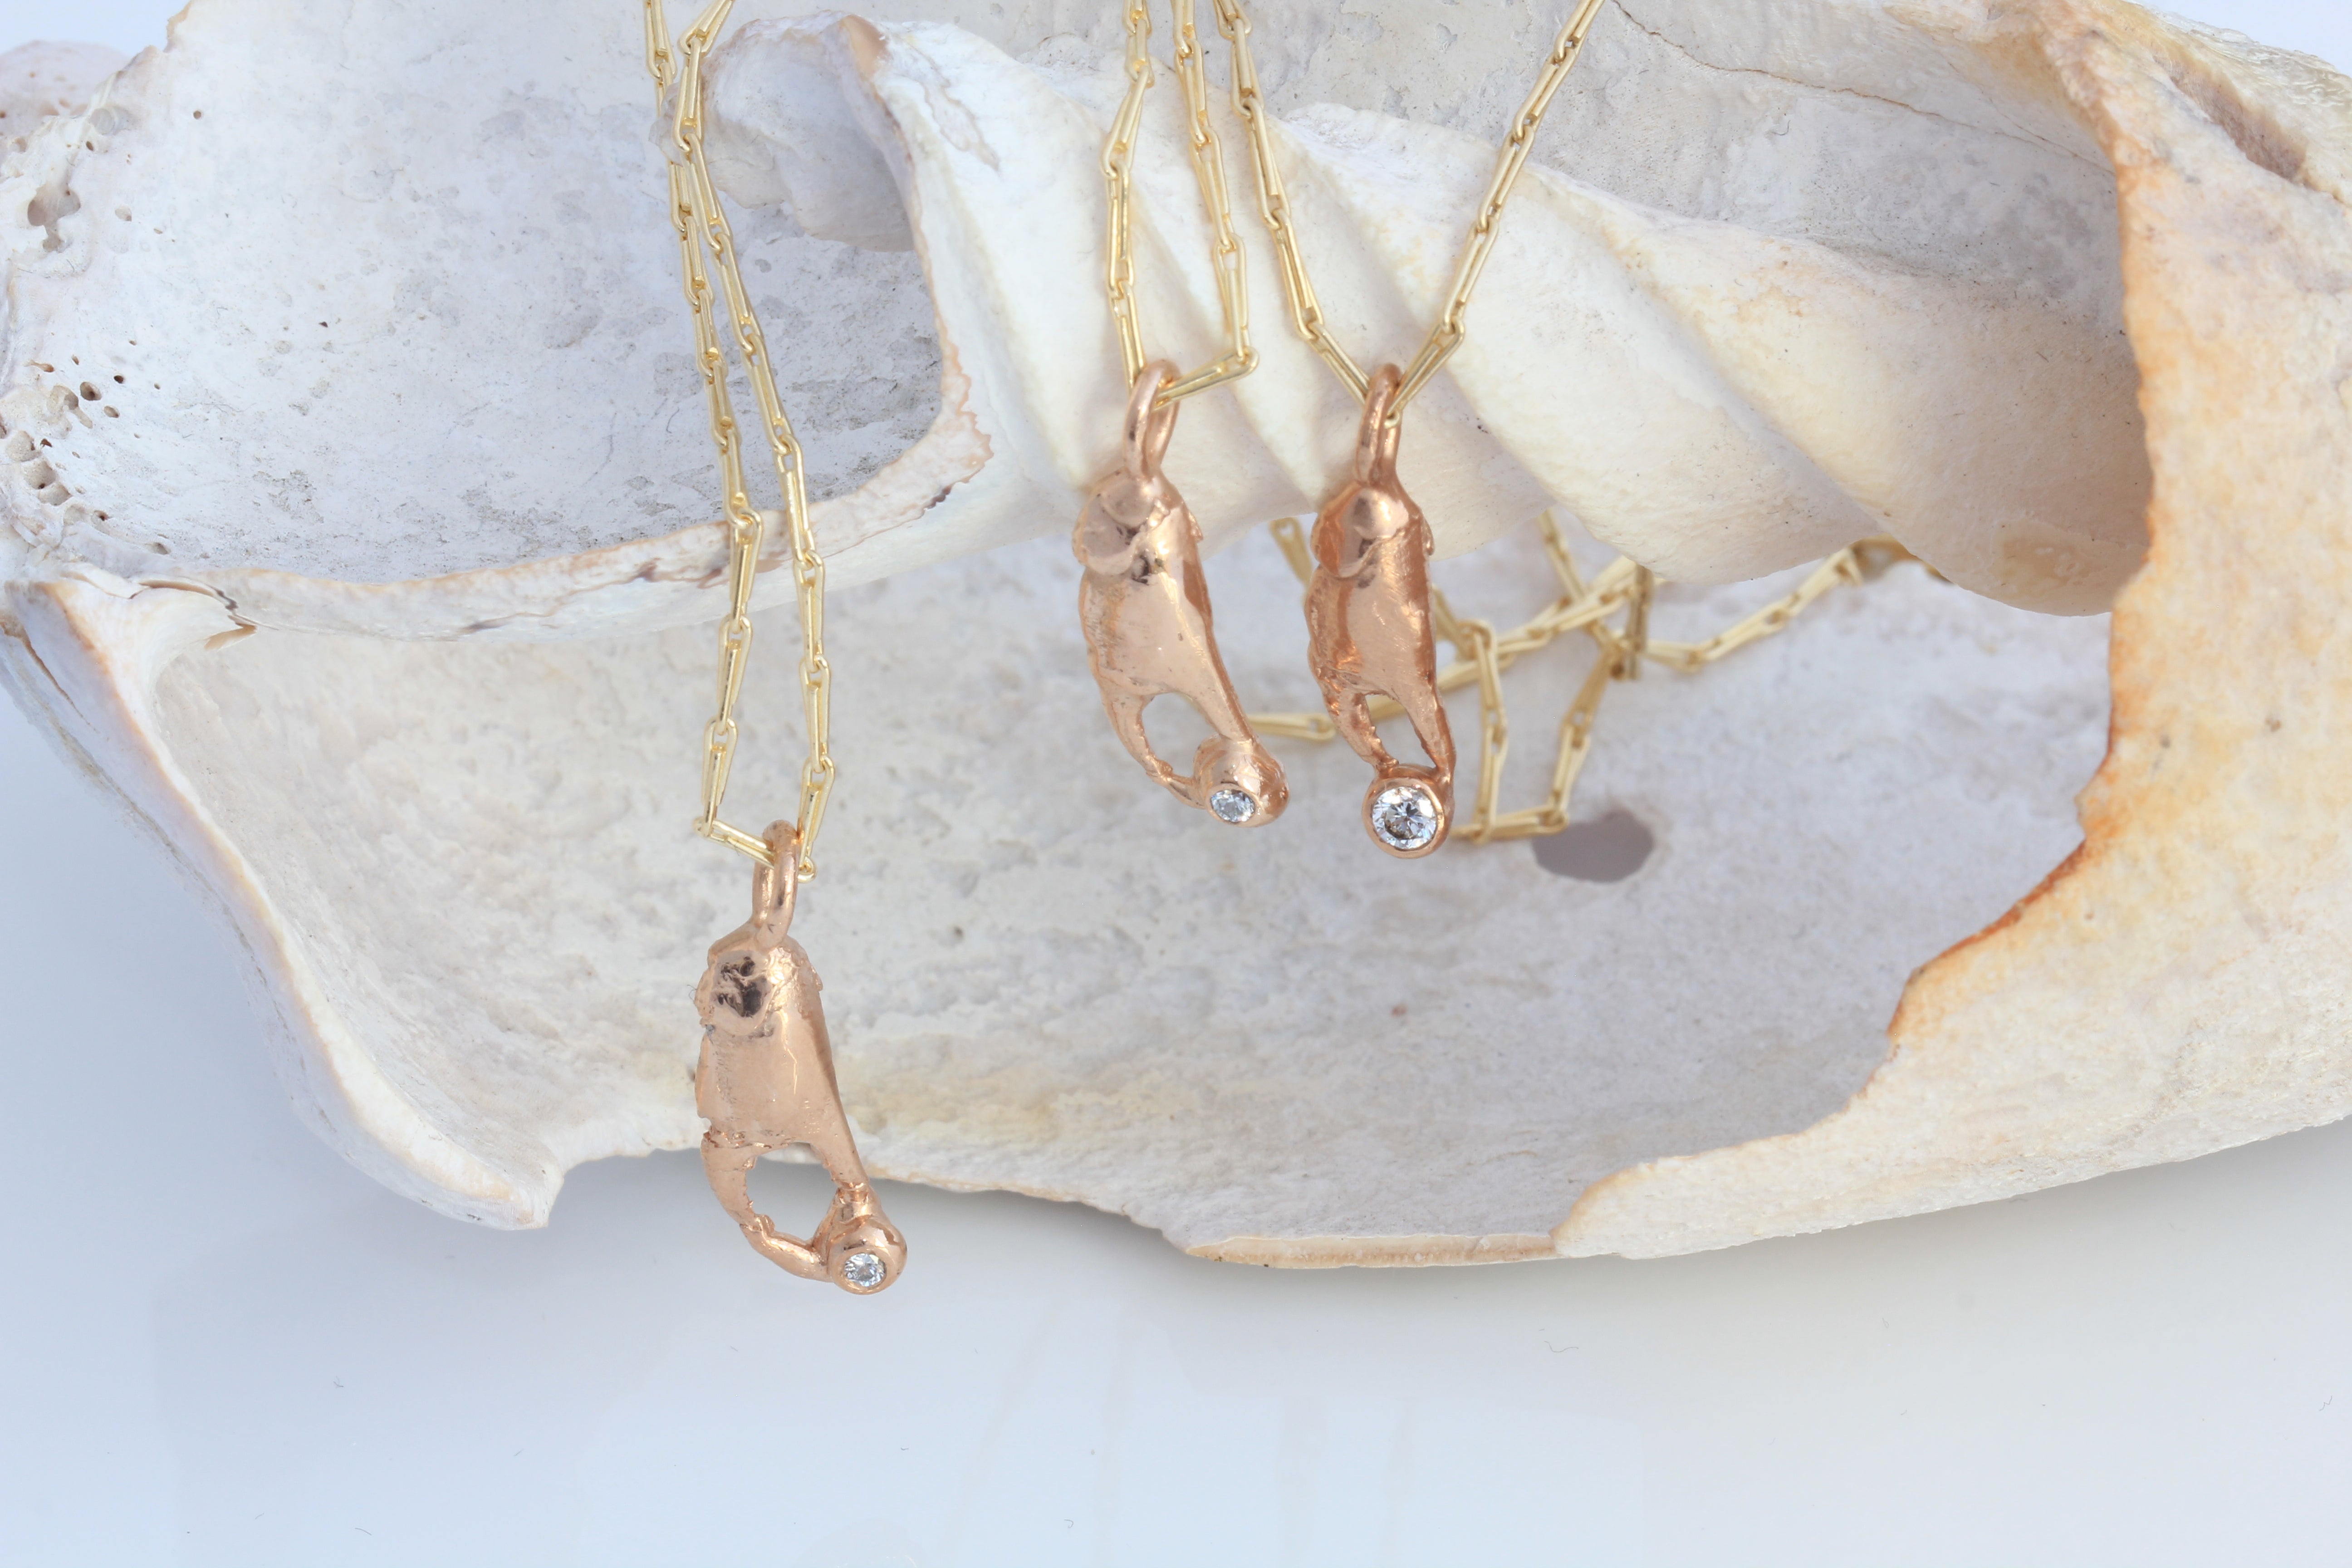 Three yellow gold chains with crab claw pendants in red gold holding diamonds. Each pendant is cast from a tiny crab claws. Would make good present. 